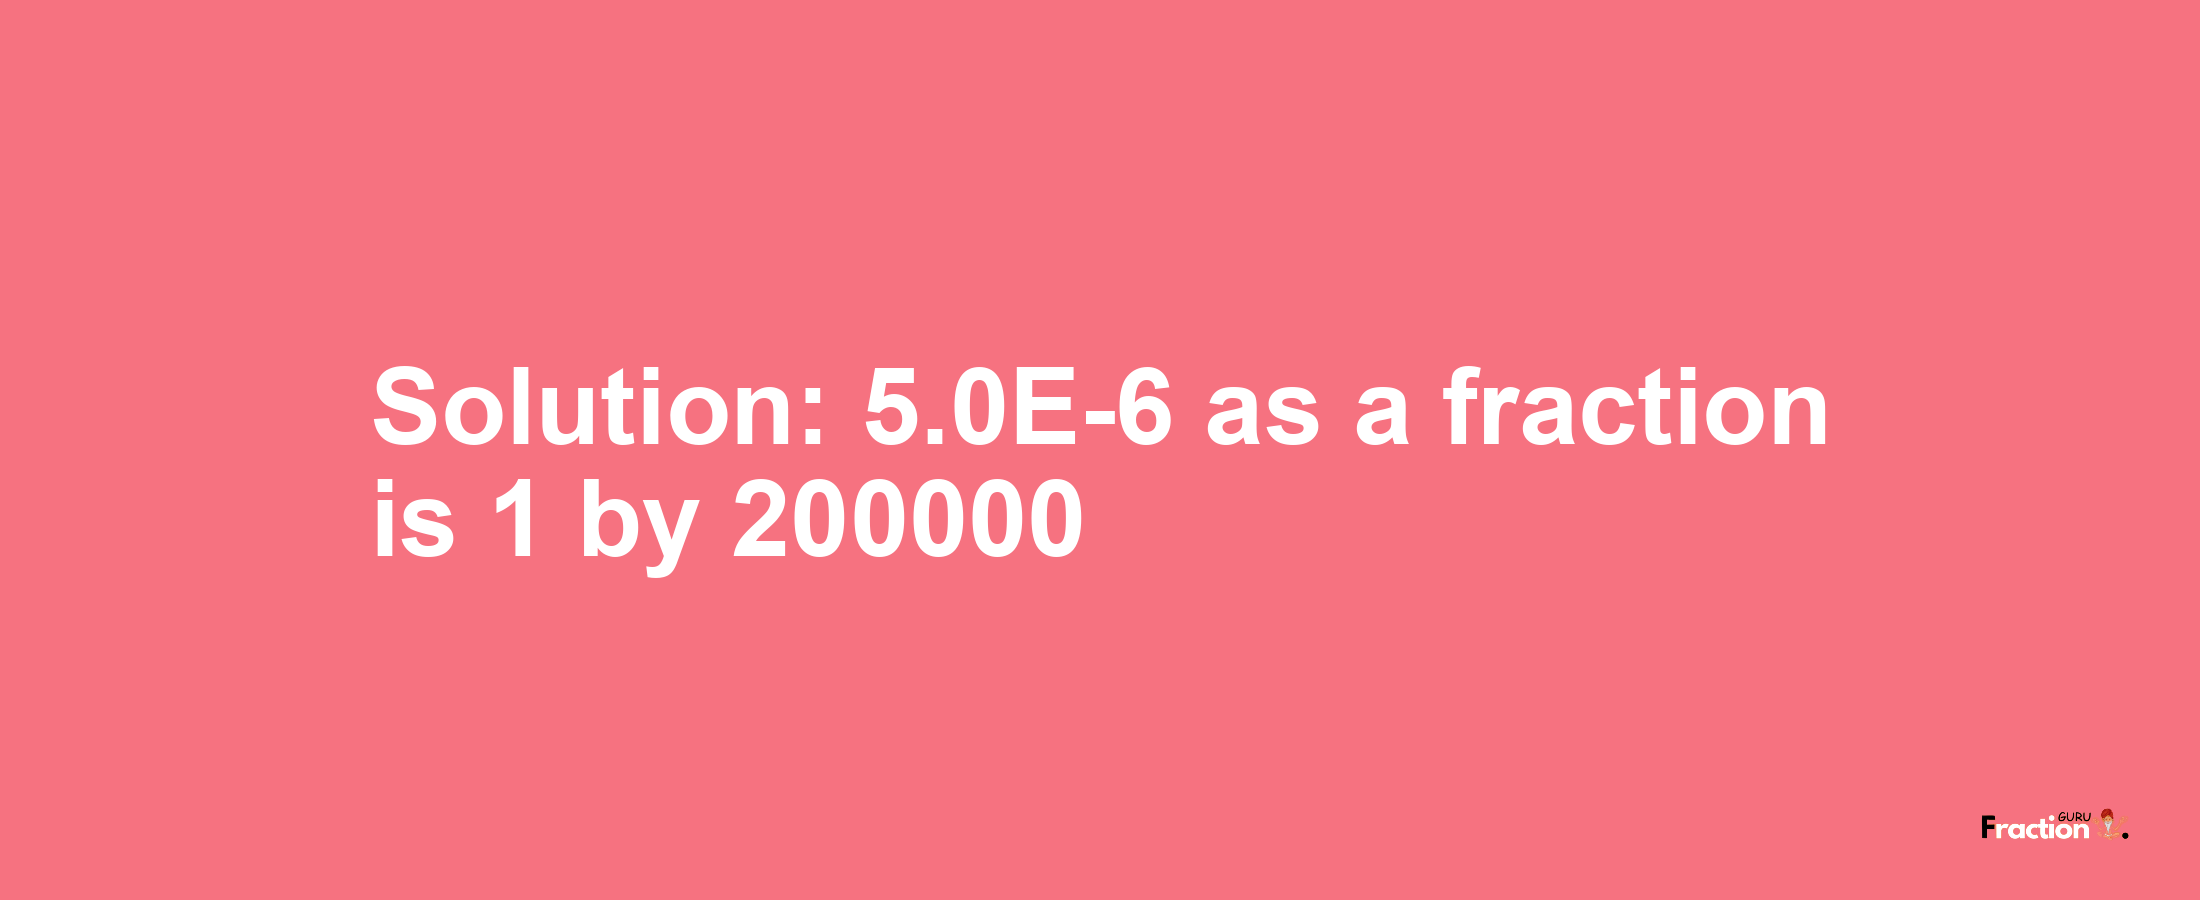 Solution:5.0E-6 as a fraction is 1/200000